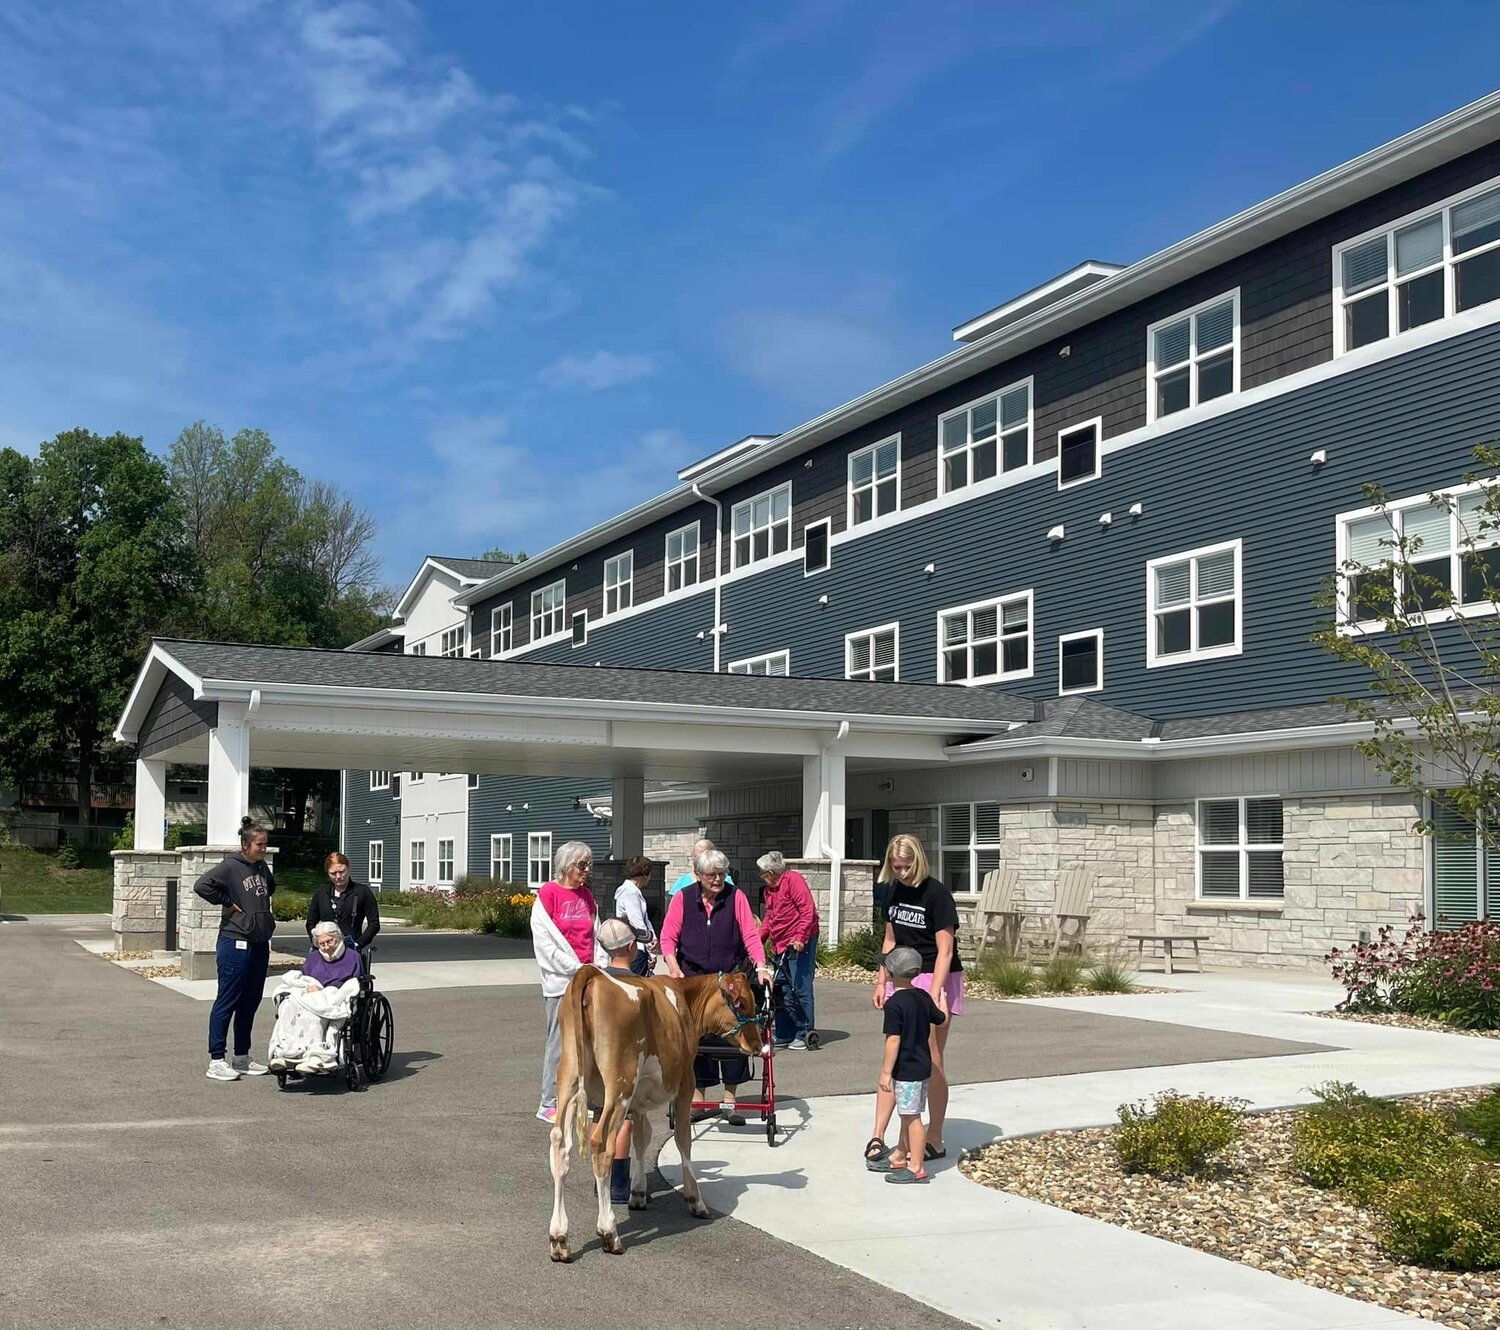 The Goodhue Living facility will be celebrating their first year of residency on October 15th from 1-4 PM.  Outdoor games for all ages, music, refreshments, and other activities are being planned.